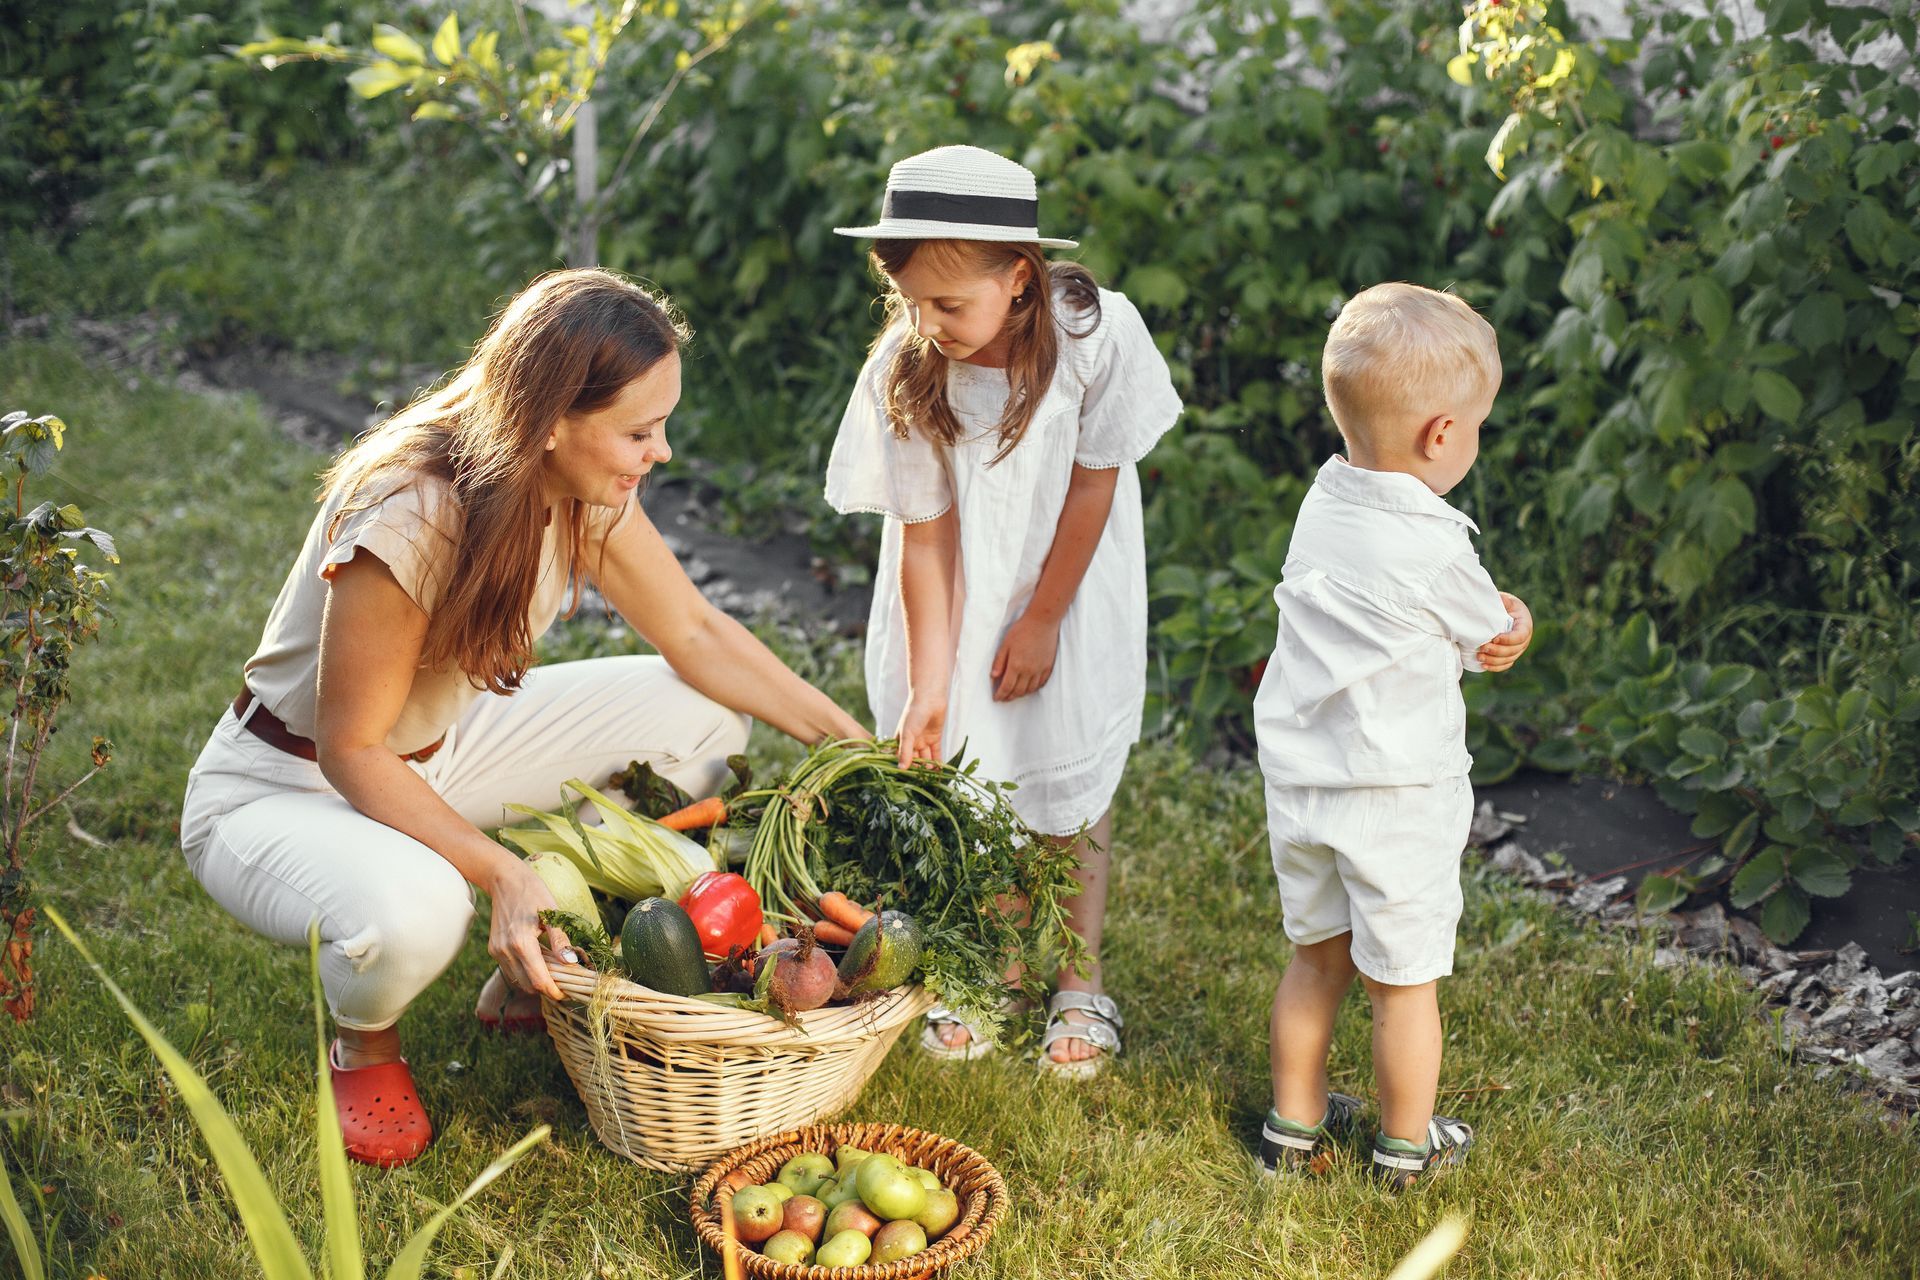 A woman and two children are picking vegetables in a garden.